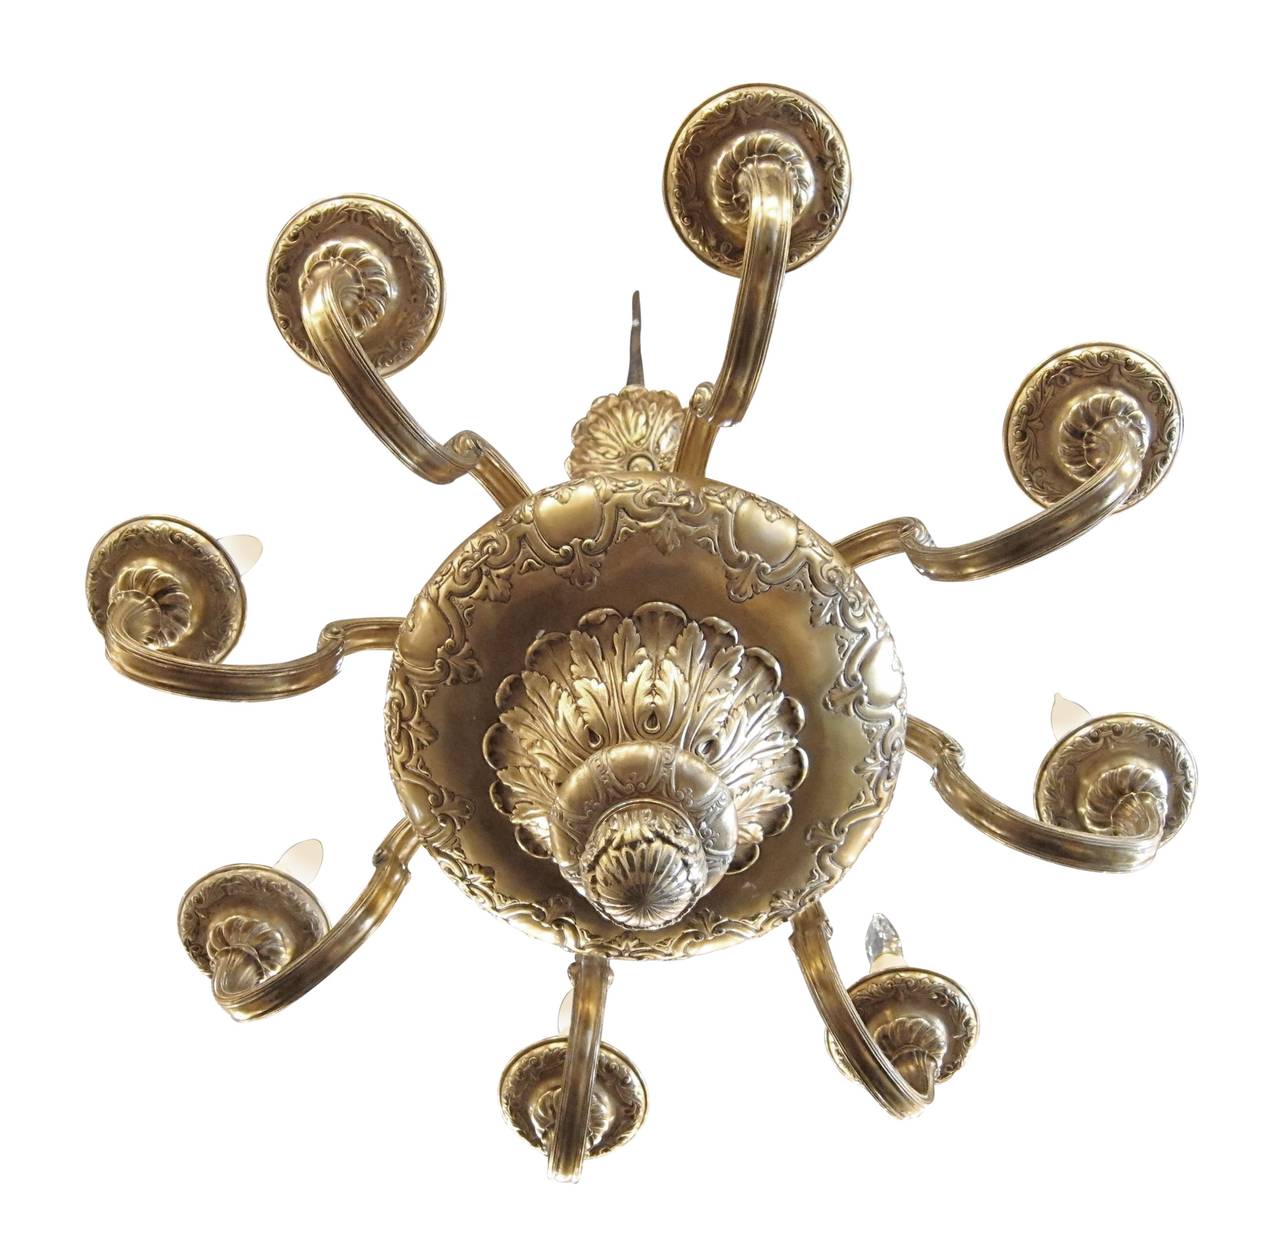 1900s French Made Gold-Plated Eight-Arm Chandelier with Cherub Relief Work 2